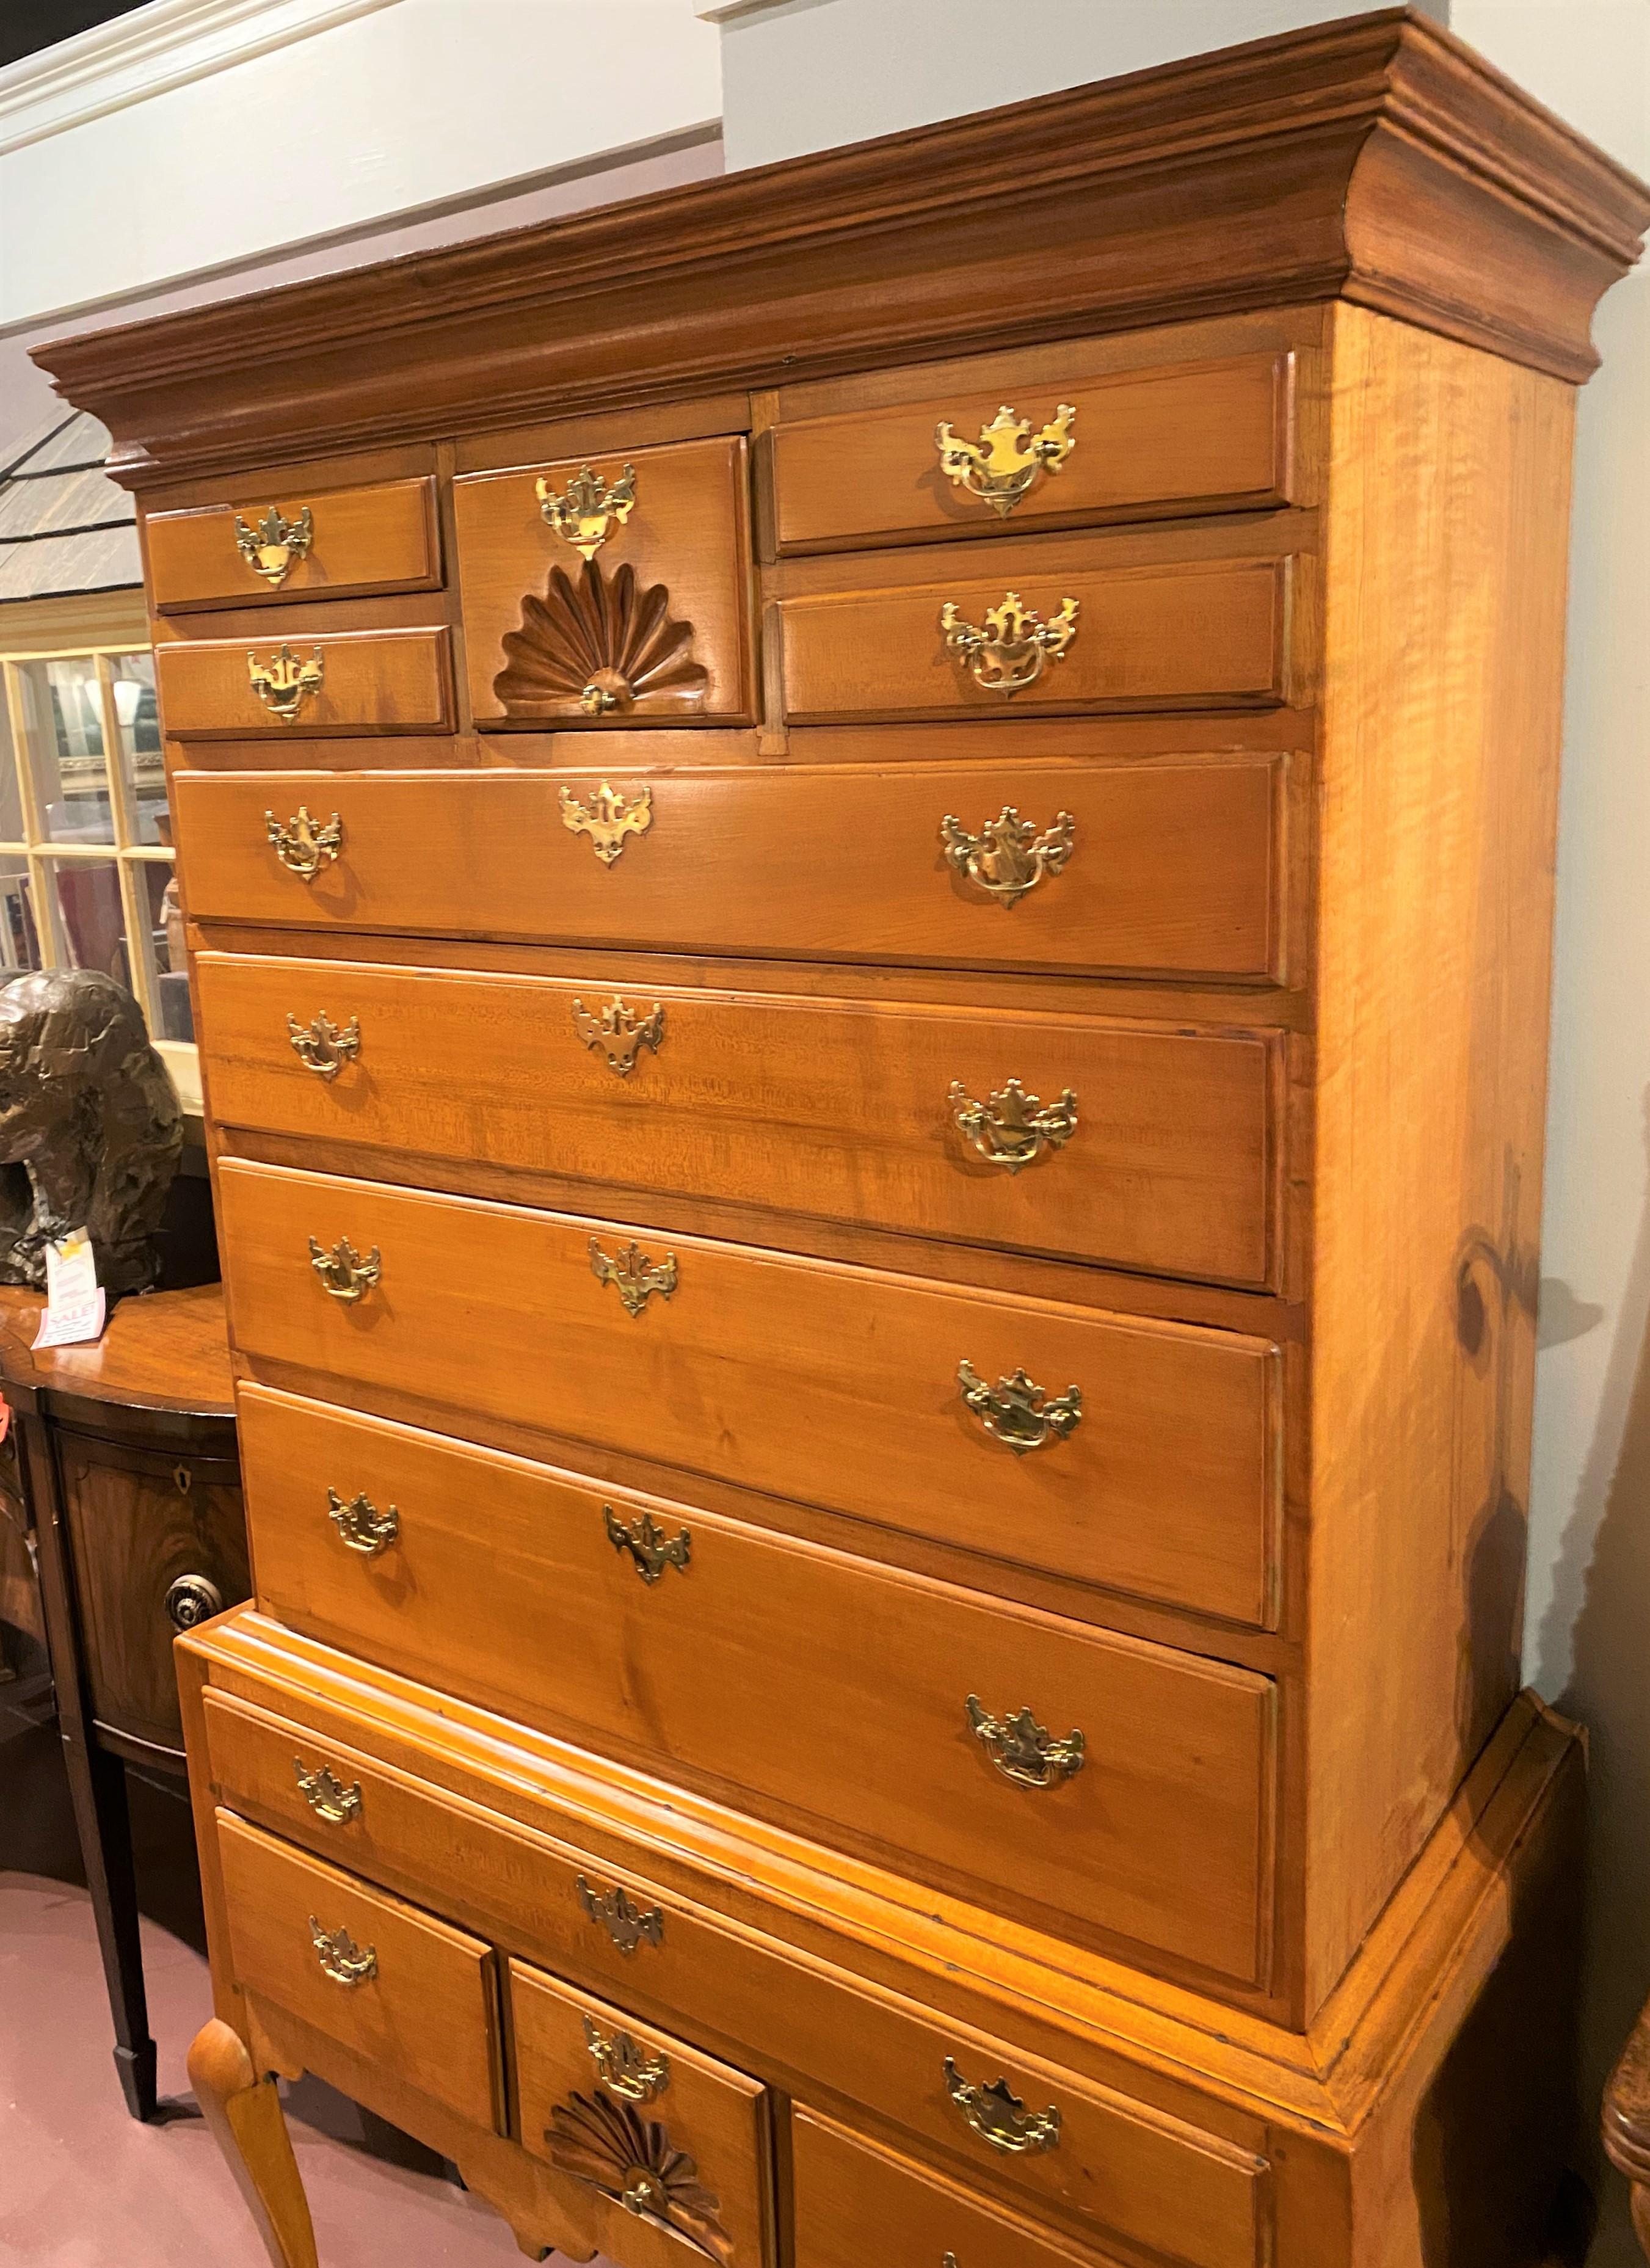 A nice example of a late 18th century New England maple highboy or high chest, its upper case with a molded cornice surmounting a central fan carved drawer flanked by four fitted small drawers over four graduated long drawers, over a lower case with